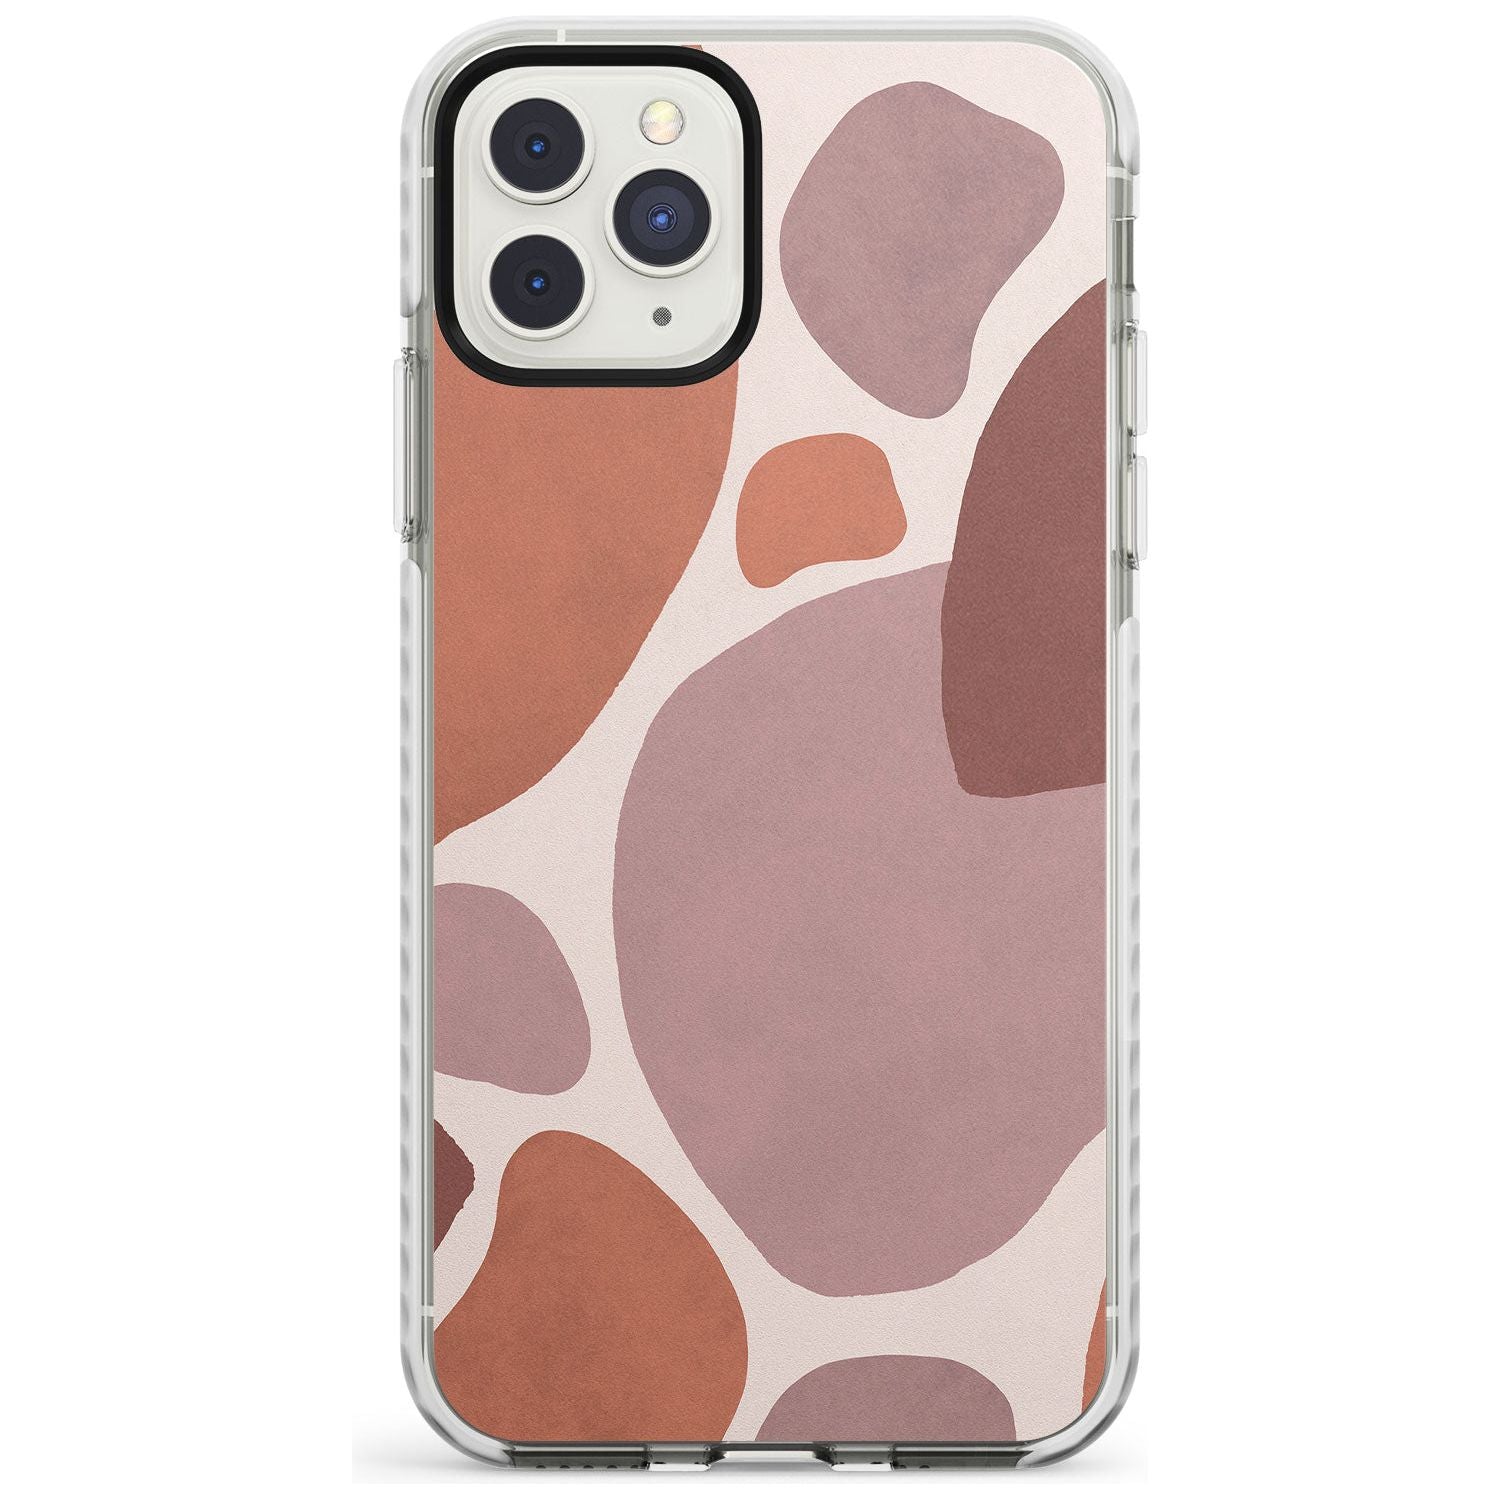 Lush Abstract Watercolour Impact Phone Case for iPhone 11 Pro Max